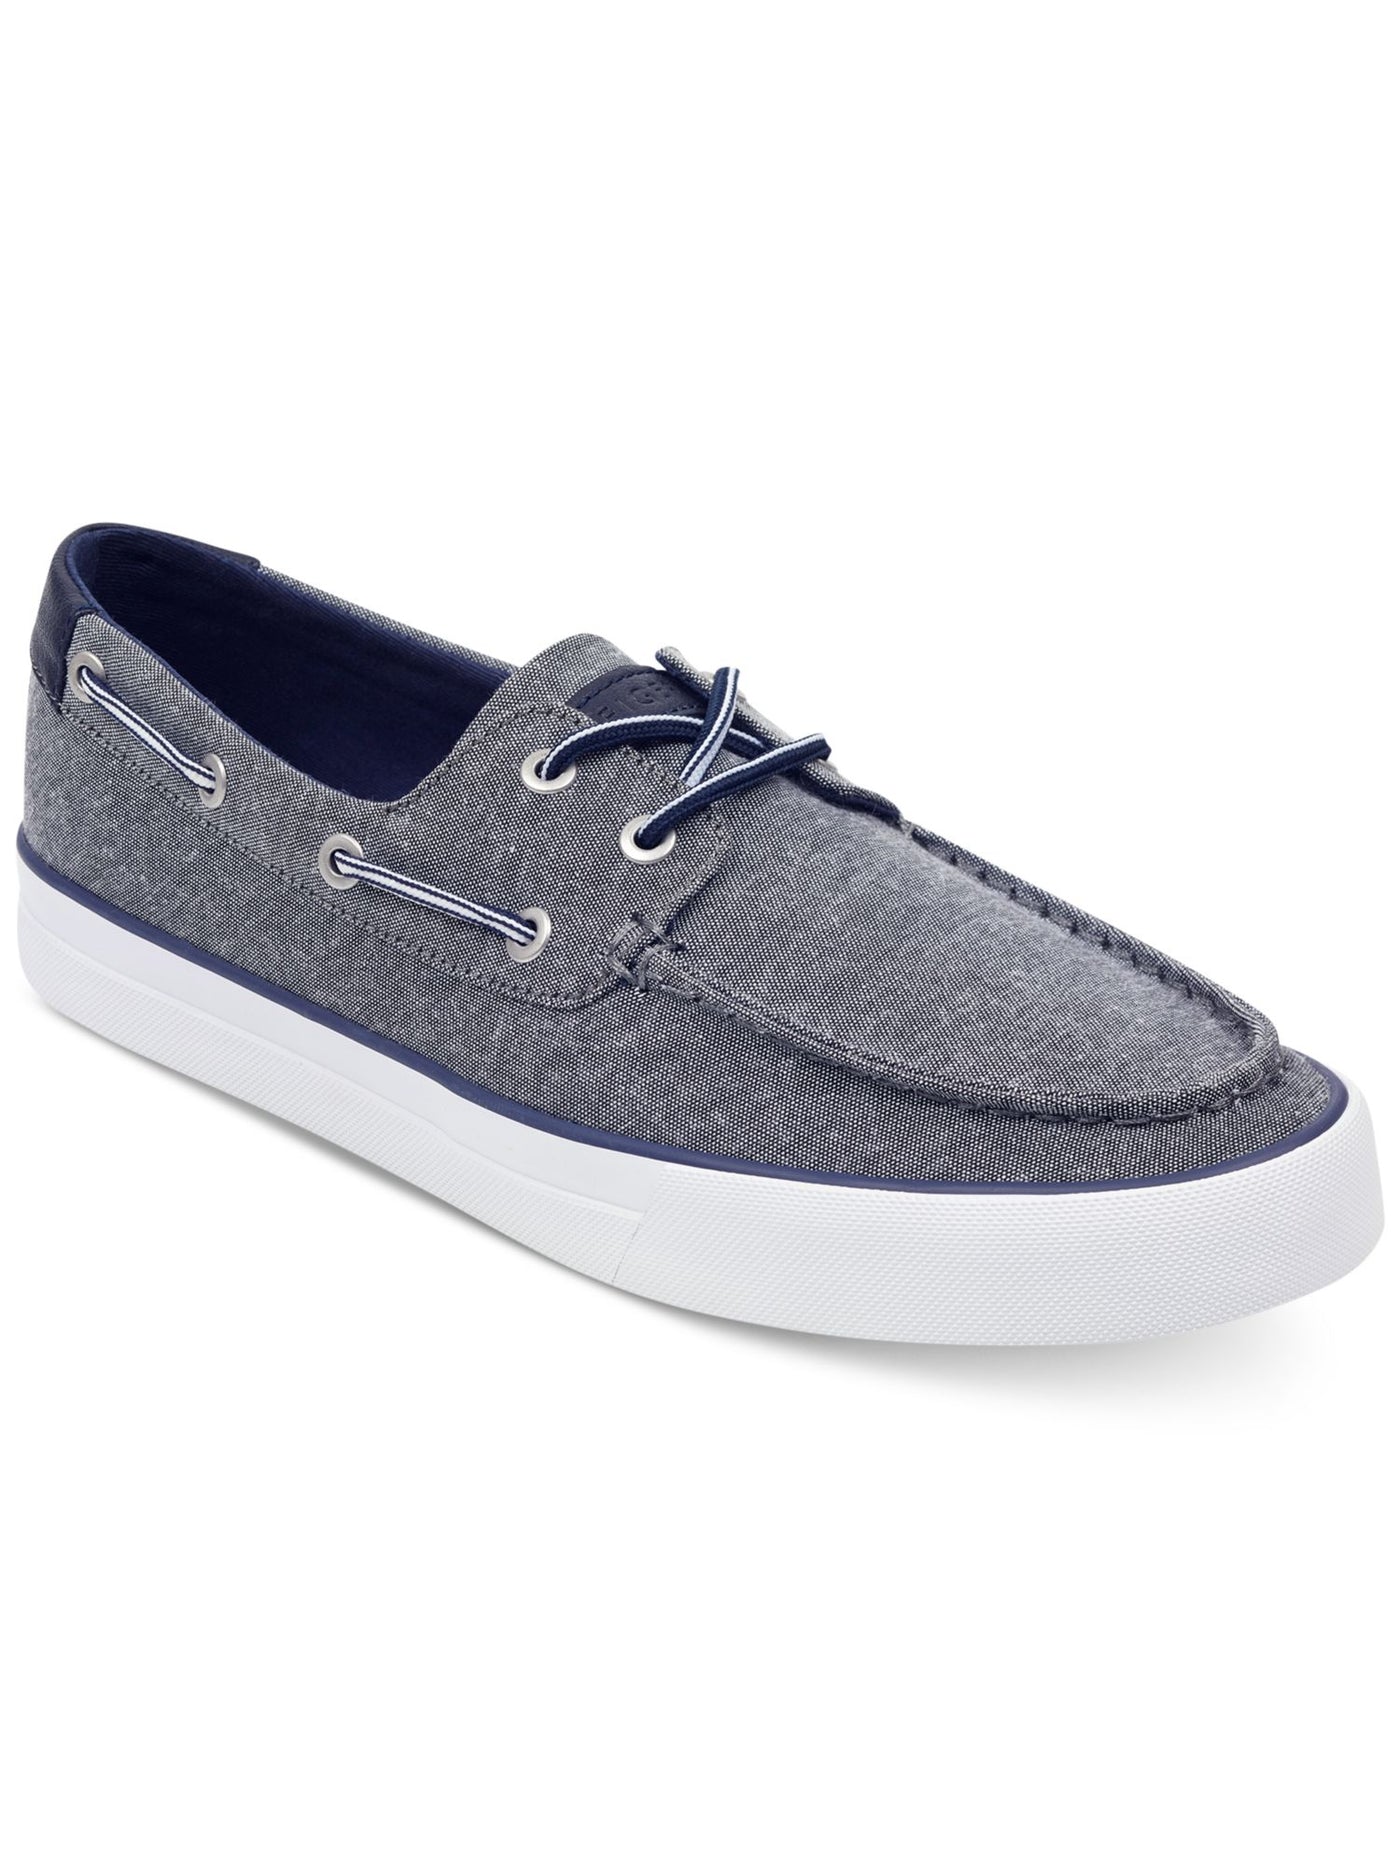 TOMMY HILFIGER Mens Gray Padded Water Resistant Petes Round Toe Lace-Up Boat Shoes 11